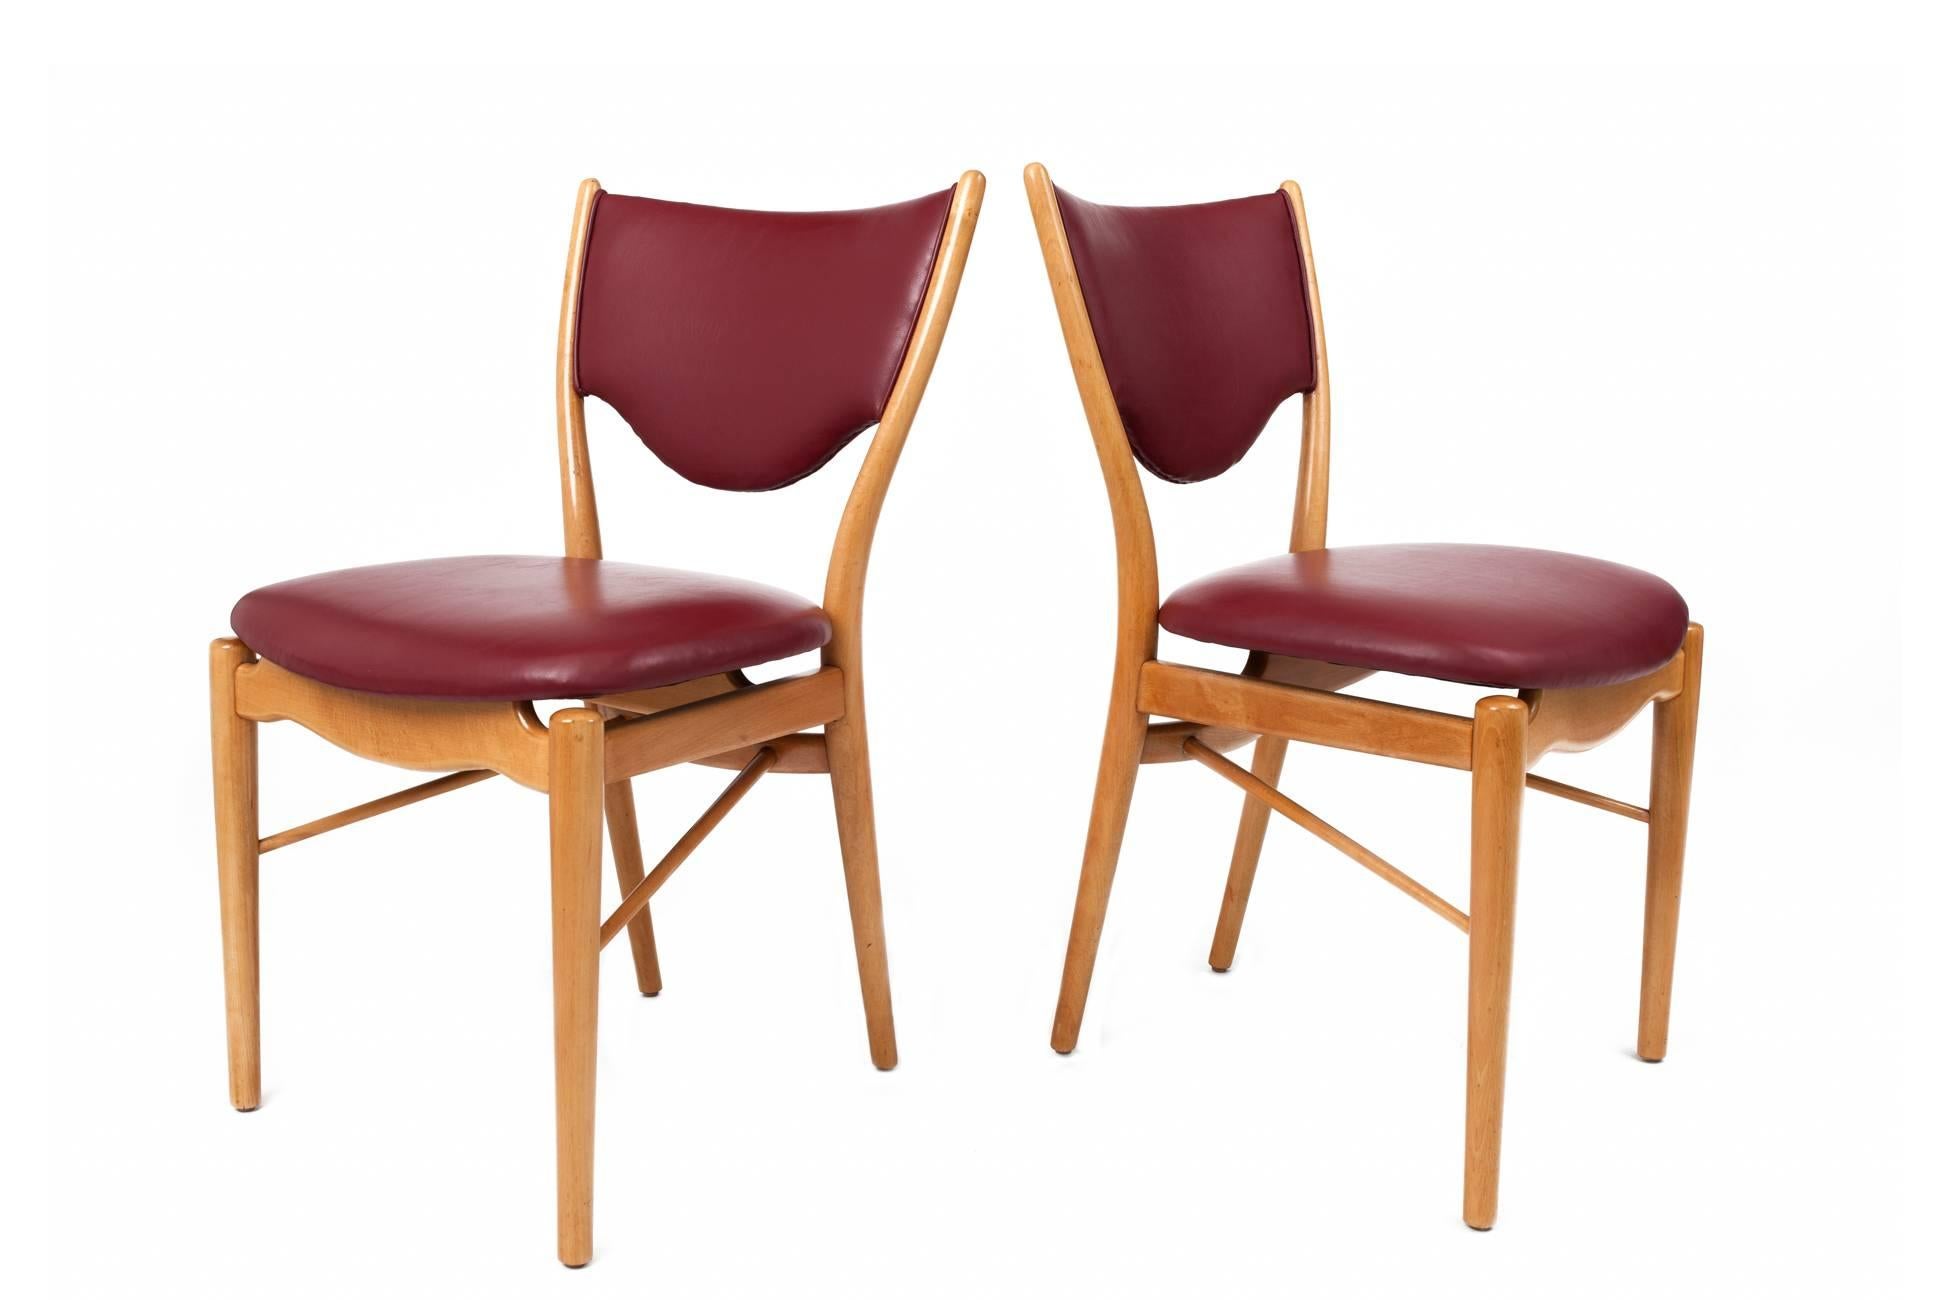 Danish Finn Juhl Sinuous Set of Six Red Dining Chairs in Beech & Leather, Denmark 1950s